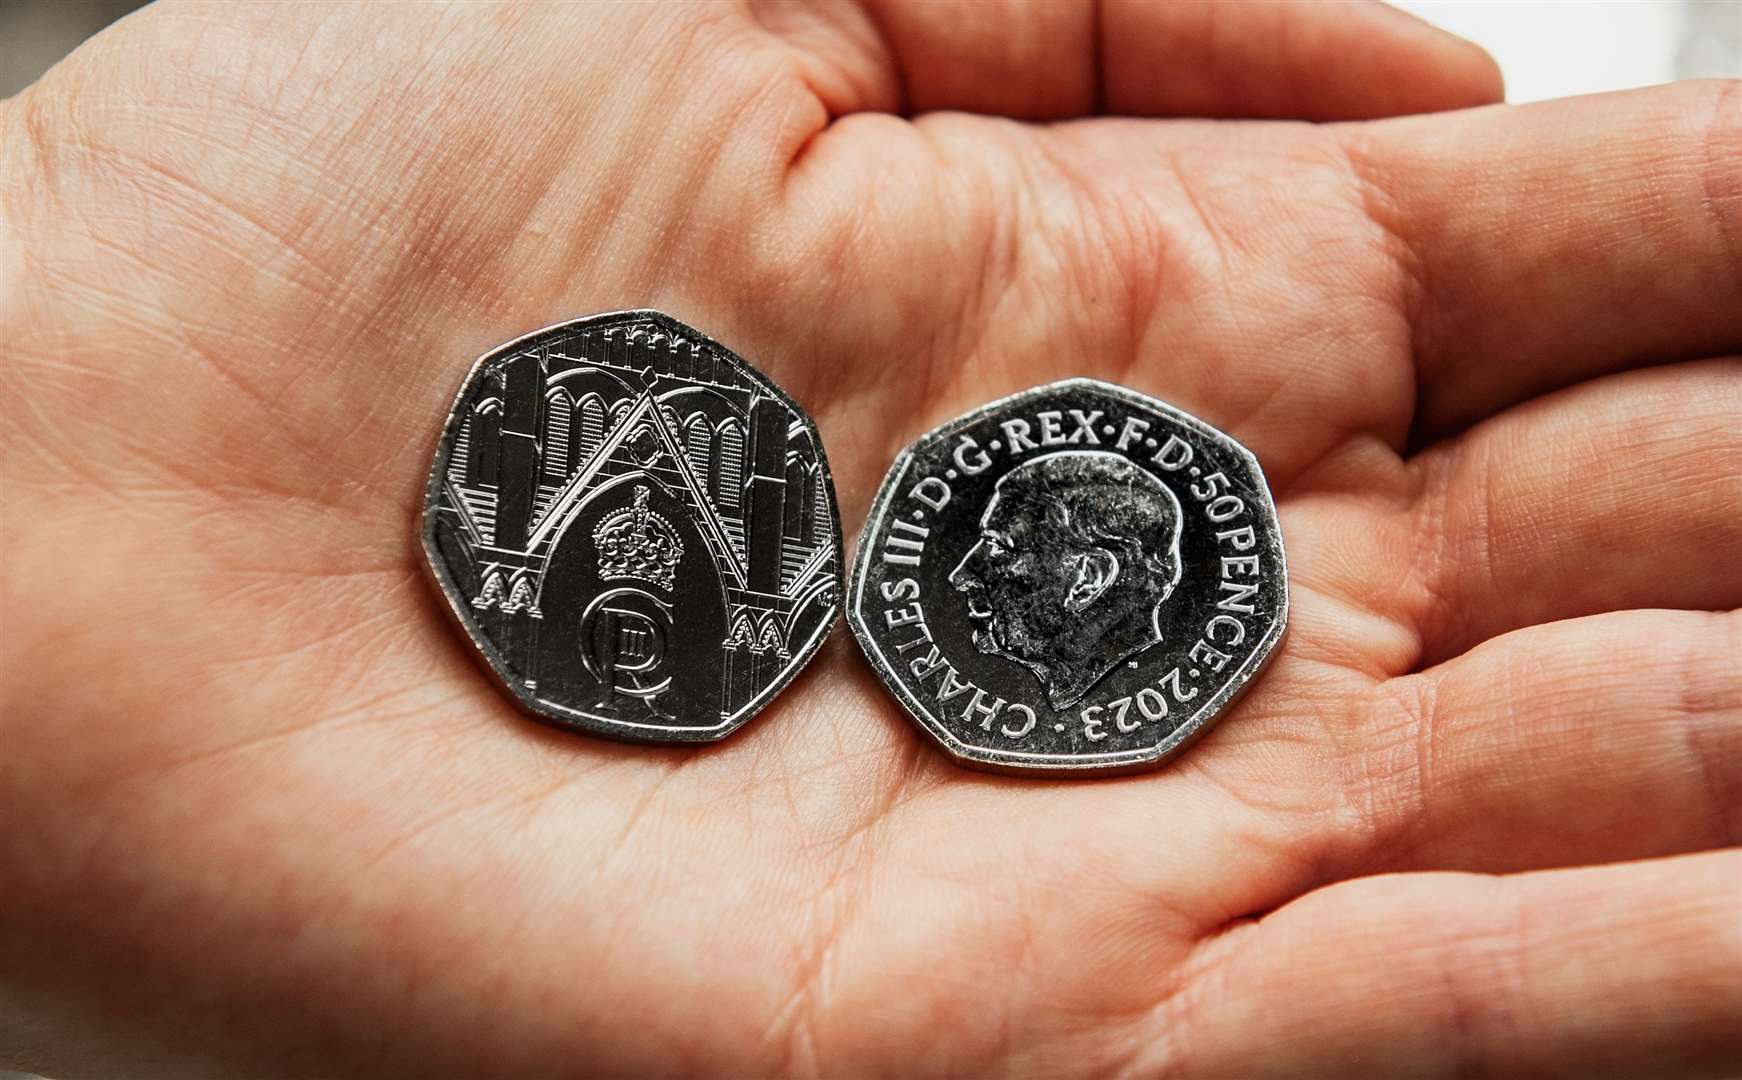 The coin features Westminster Abbey and the King’s cipher on the back. Image: The Royal Mint.